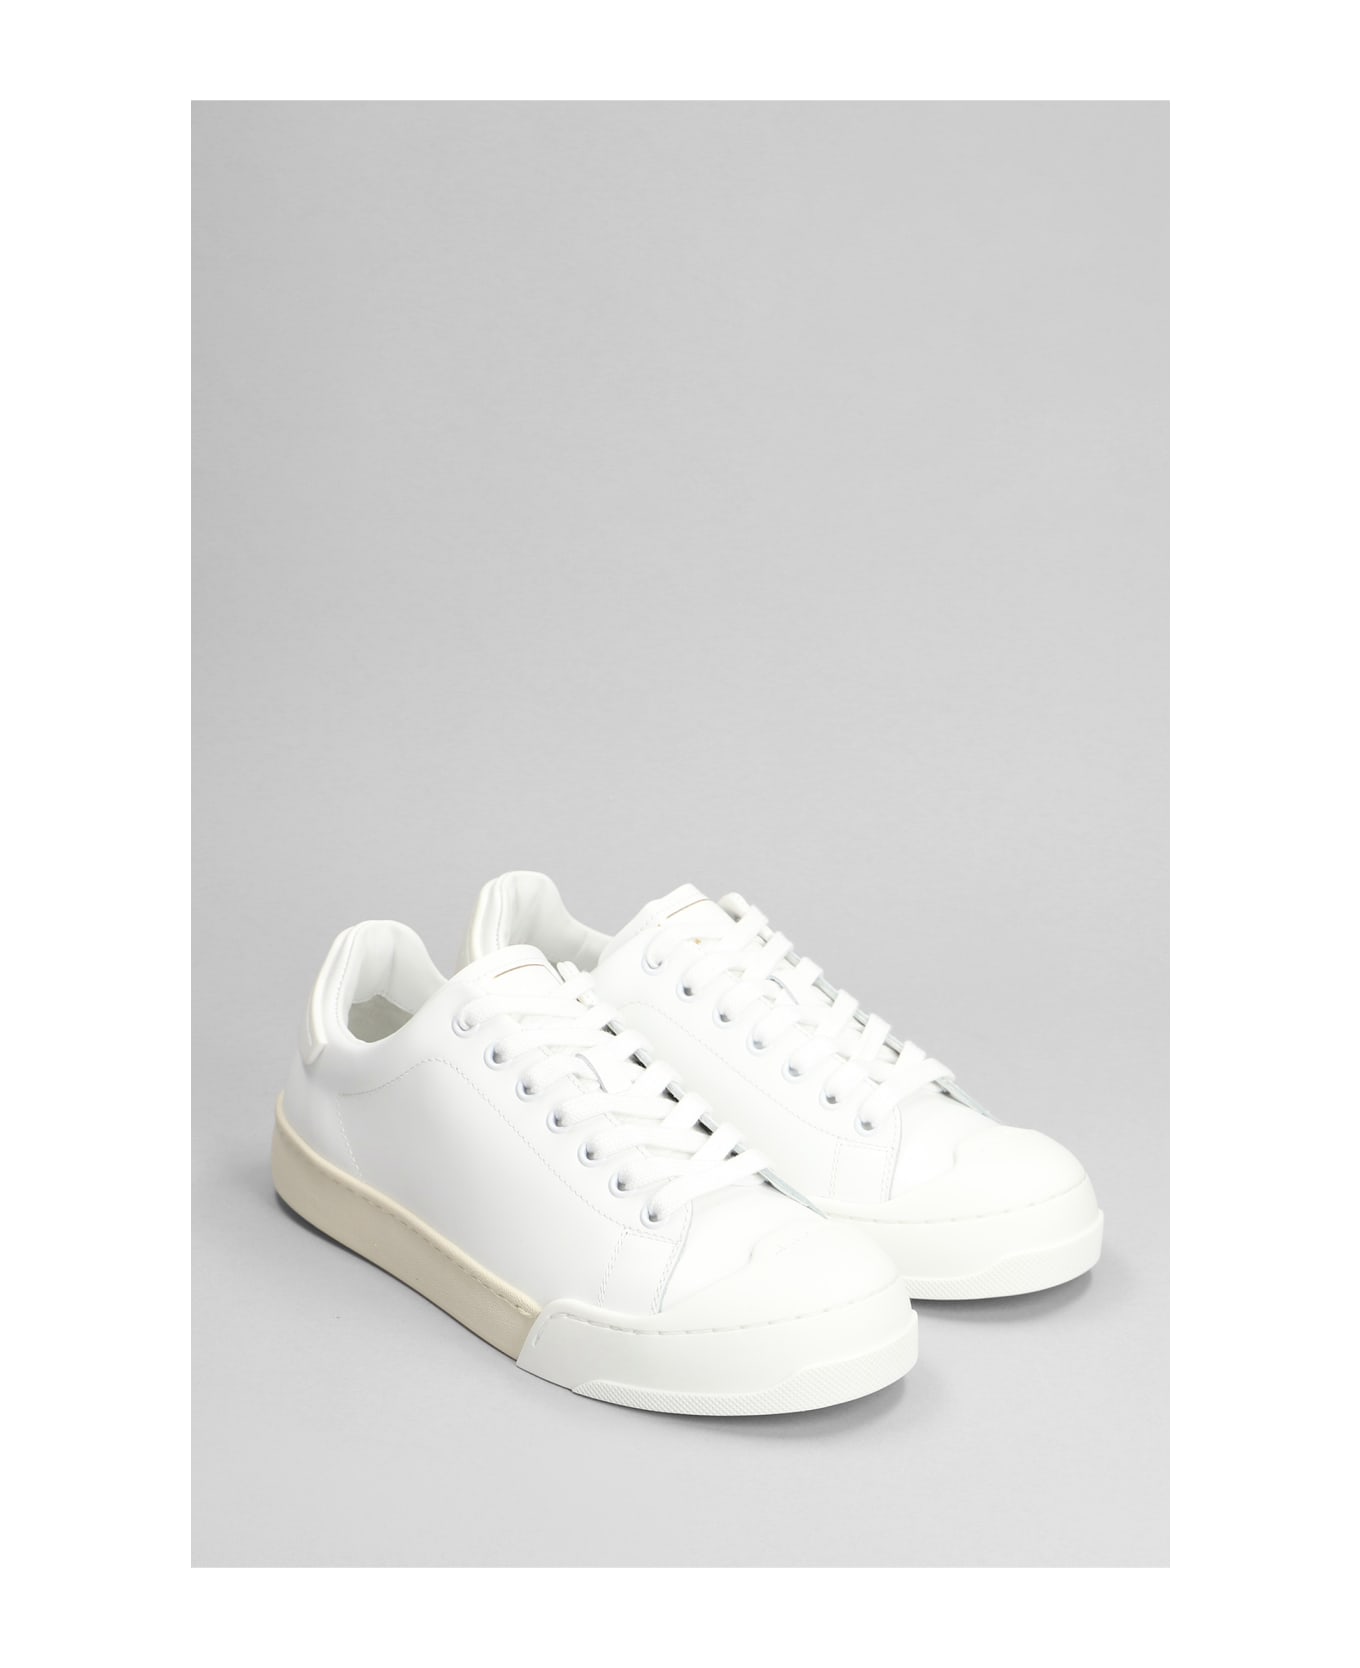 Marni Sneakers In White Leather - WHITE スニーカー